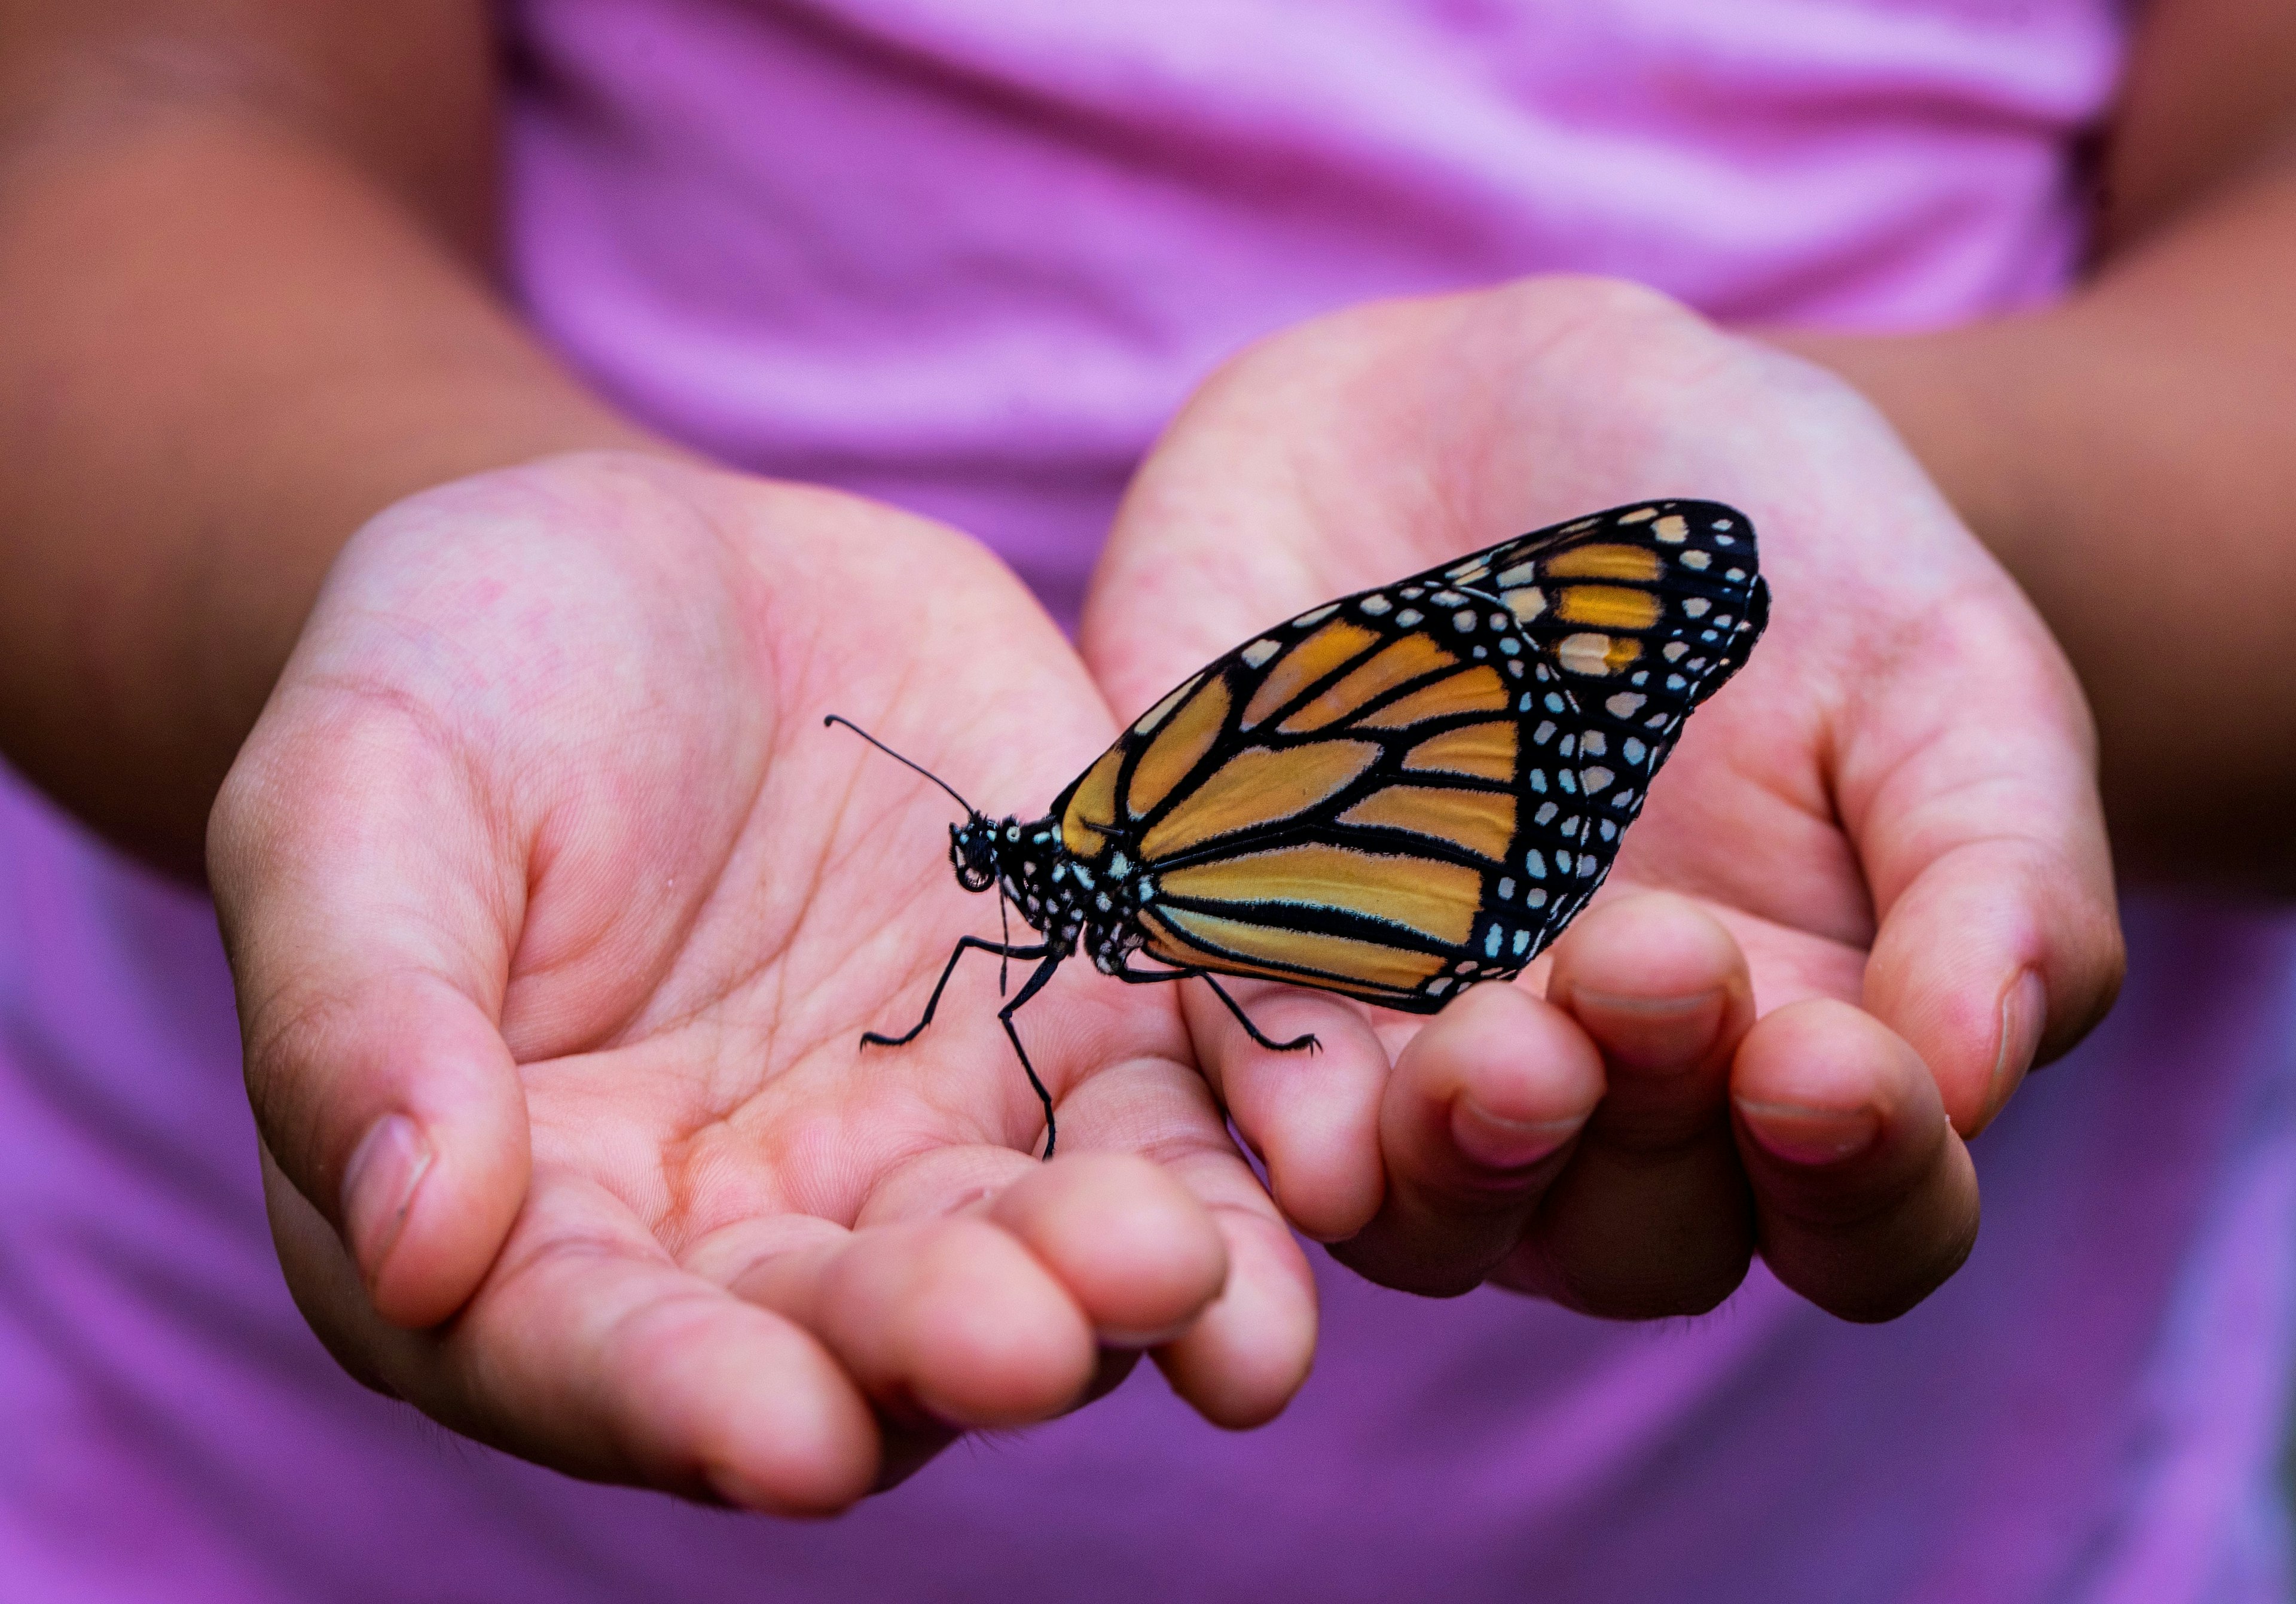 A child holding an orange and black monarch butterfly in their hands